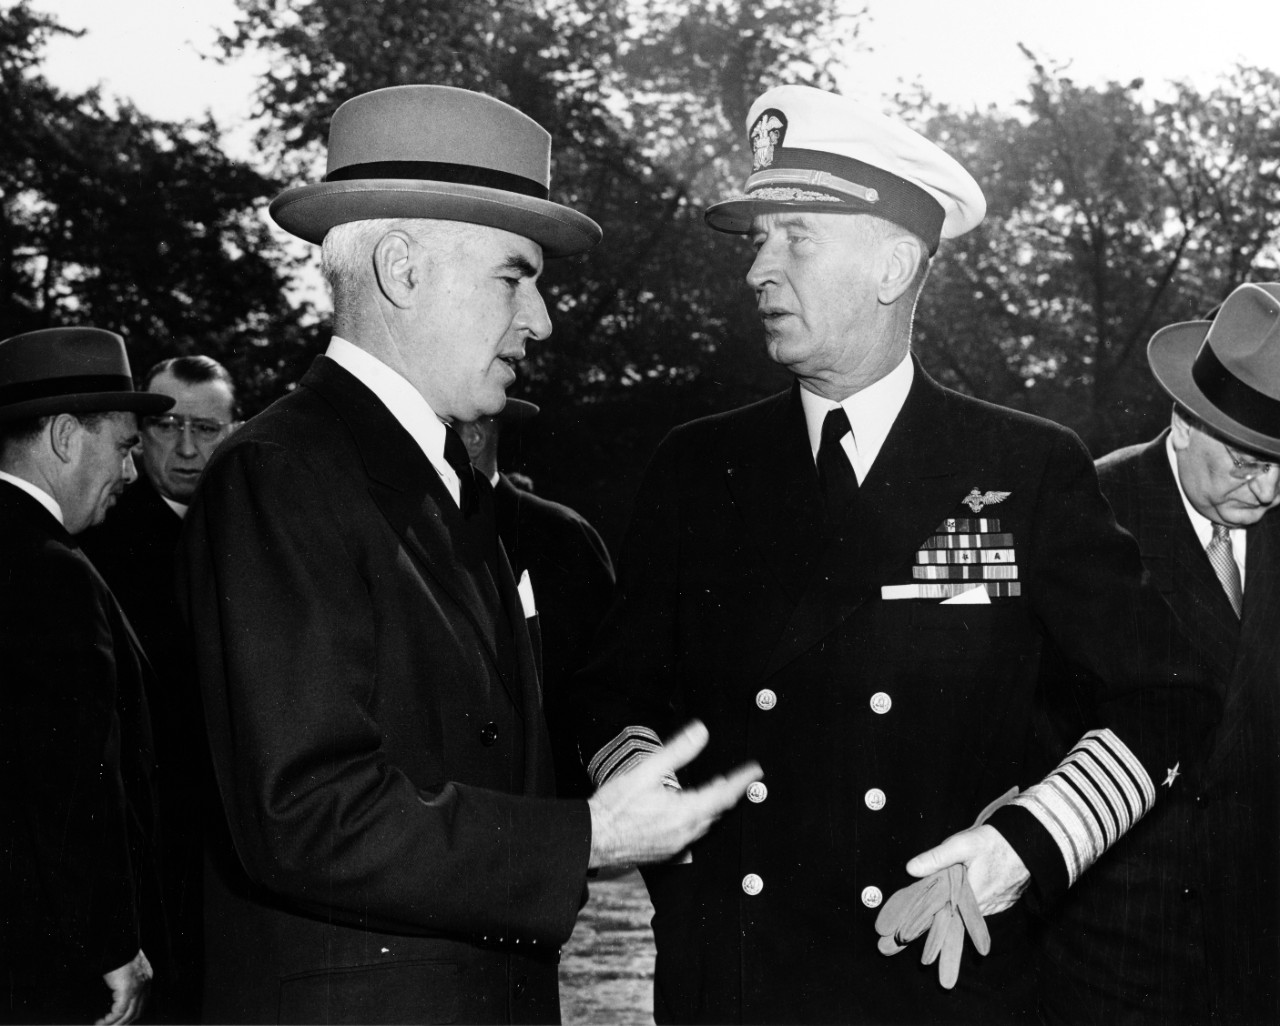 FADM Ernest J. King, Chief of Naval Operations, and Edward R. Stettinius, Secretary of State